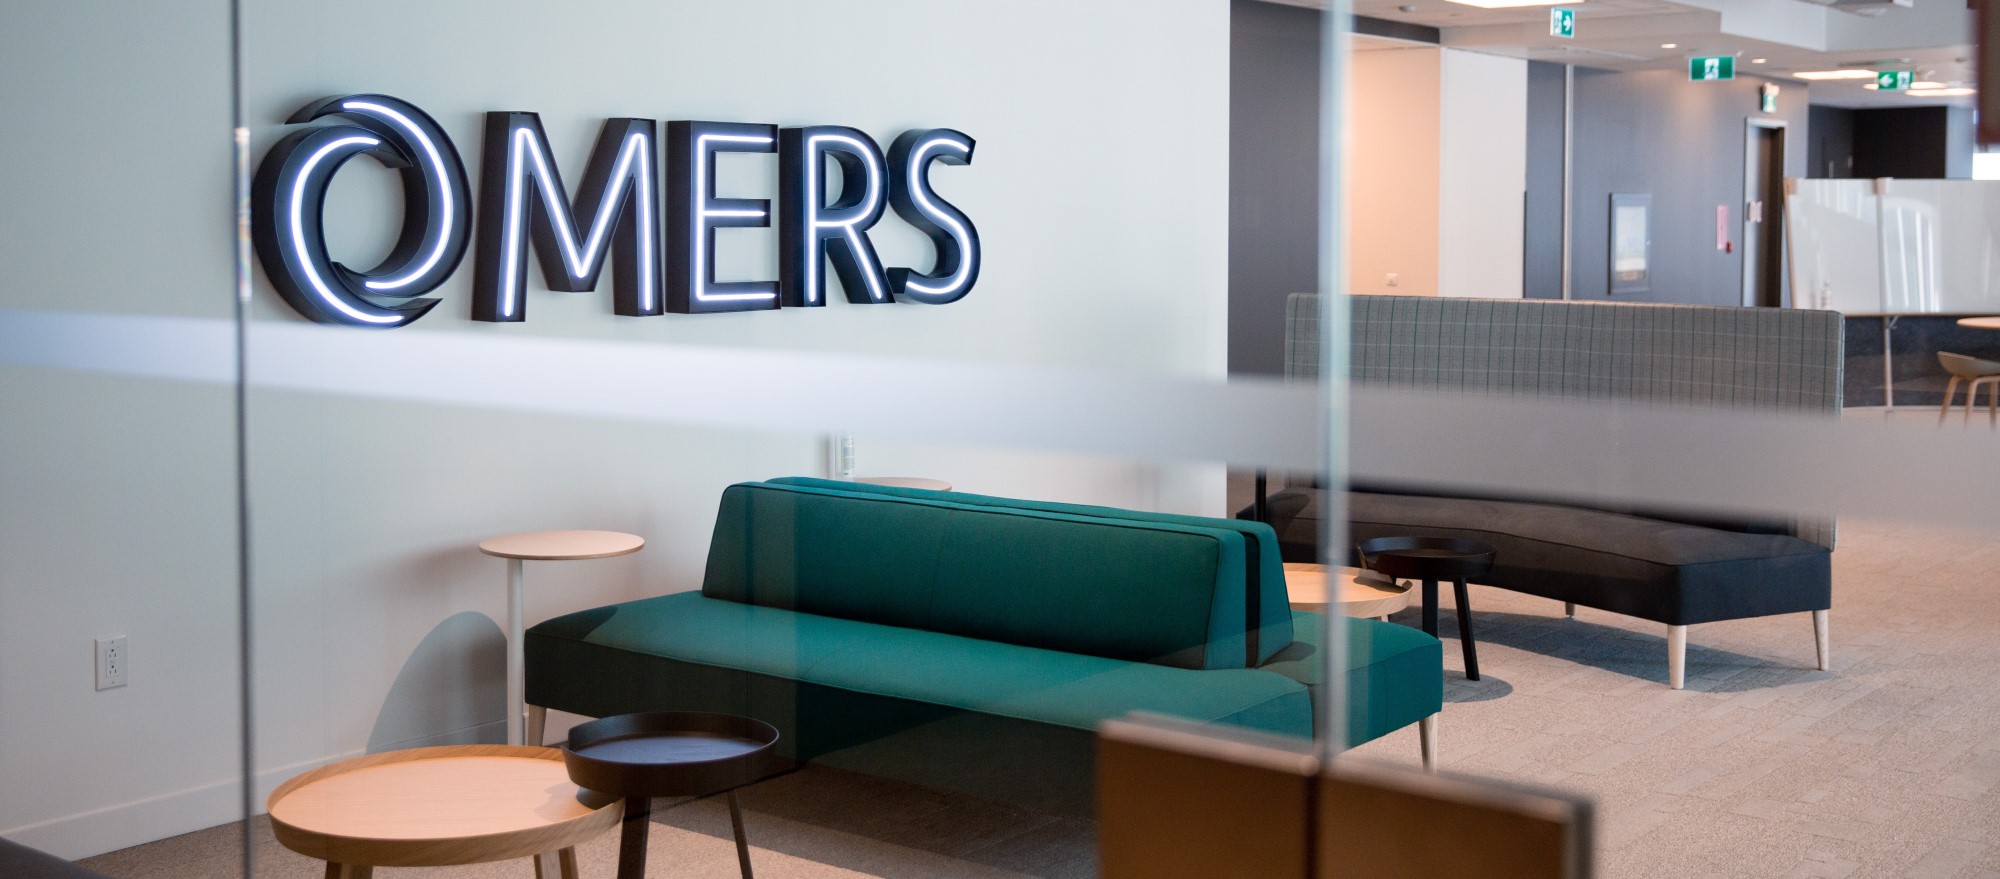 The inside of an office building with OMERS on the wall